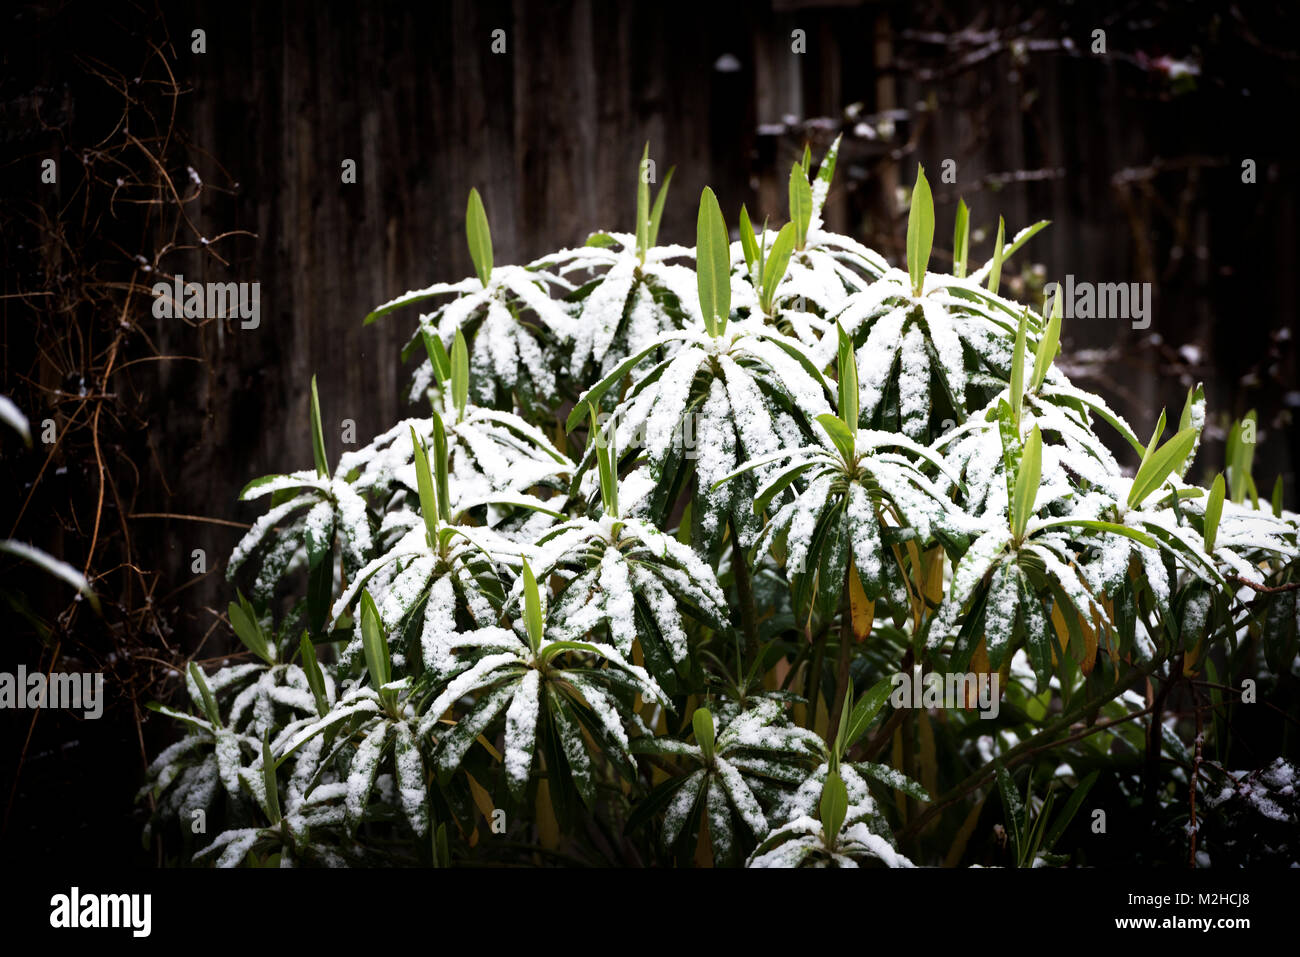 euphorbia mellifera, honey spurge, covered in snow showing hardy resilience. Stock Photo